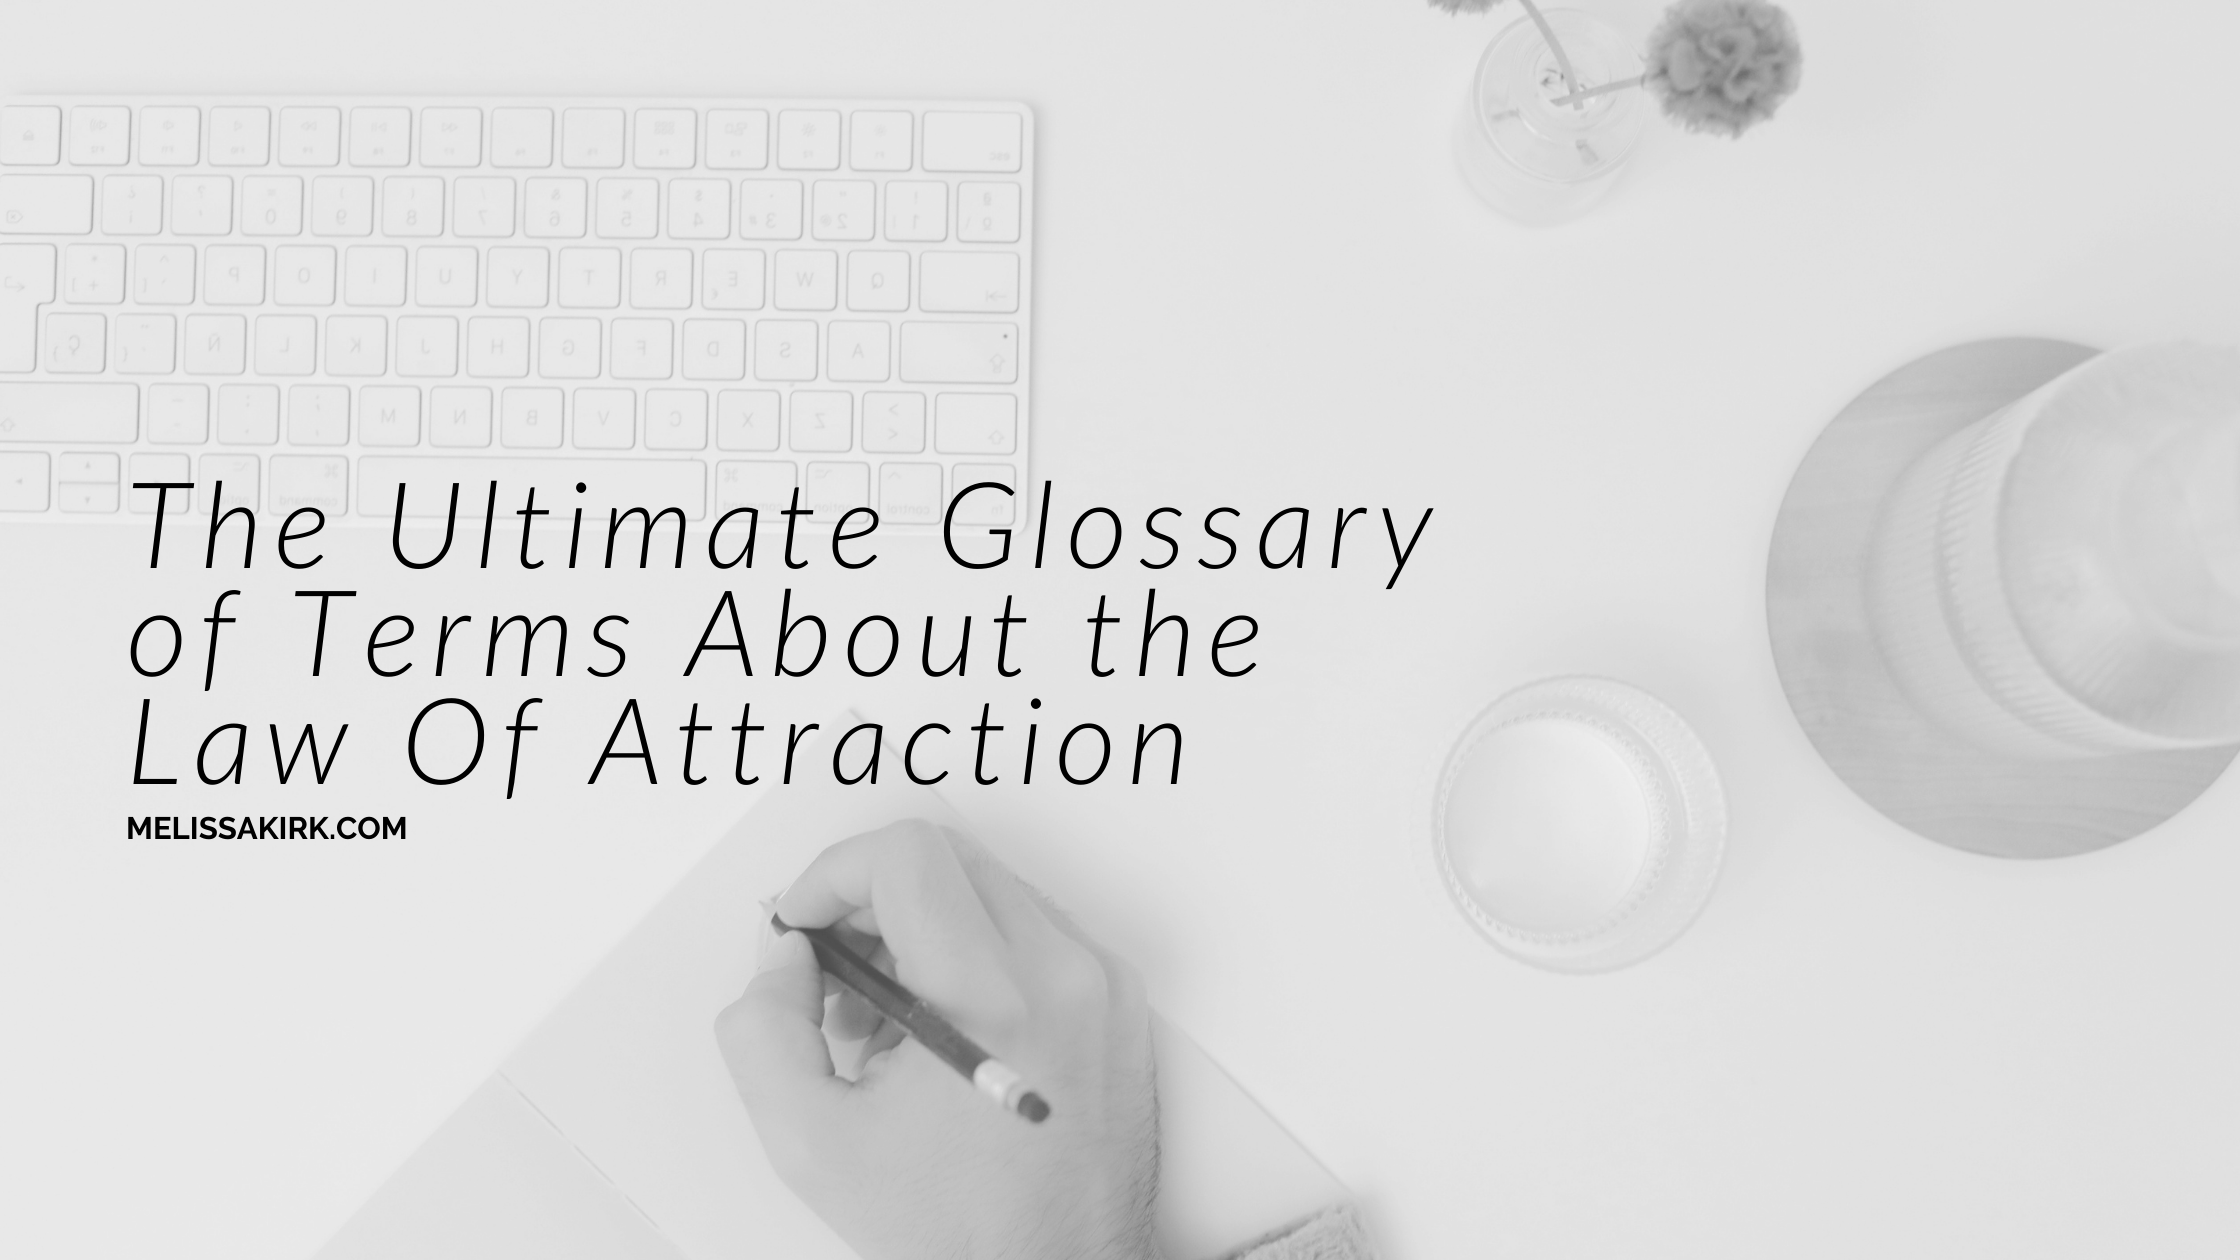 The Ultimate Glossary of Terms About The Law of Attraction